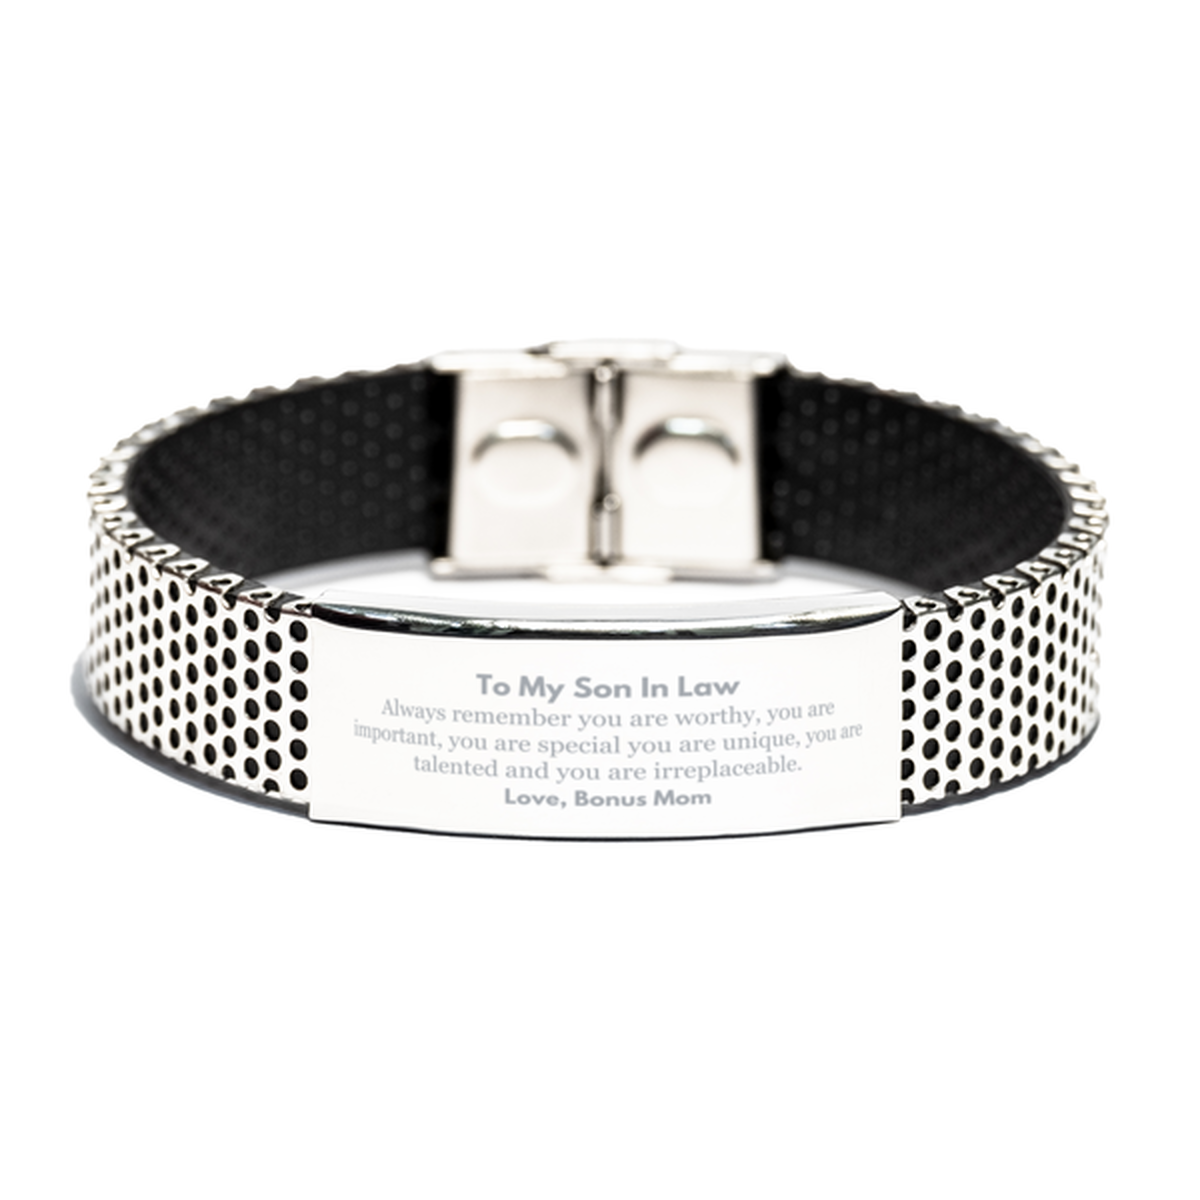 Son In Law Birthday Gifts from Bonus Mom, Inspirational Stainless Steel Bracelet for Son In Law Christmas Graduation Gifts for Son In Law Always remember you are worthy, you are important. Love, Bonus Mom